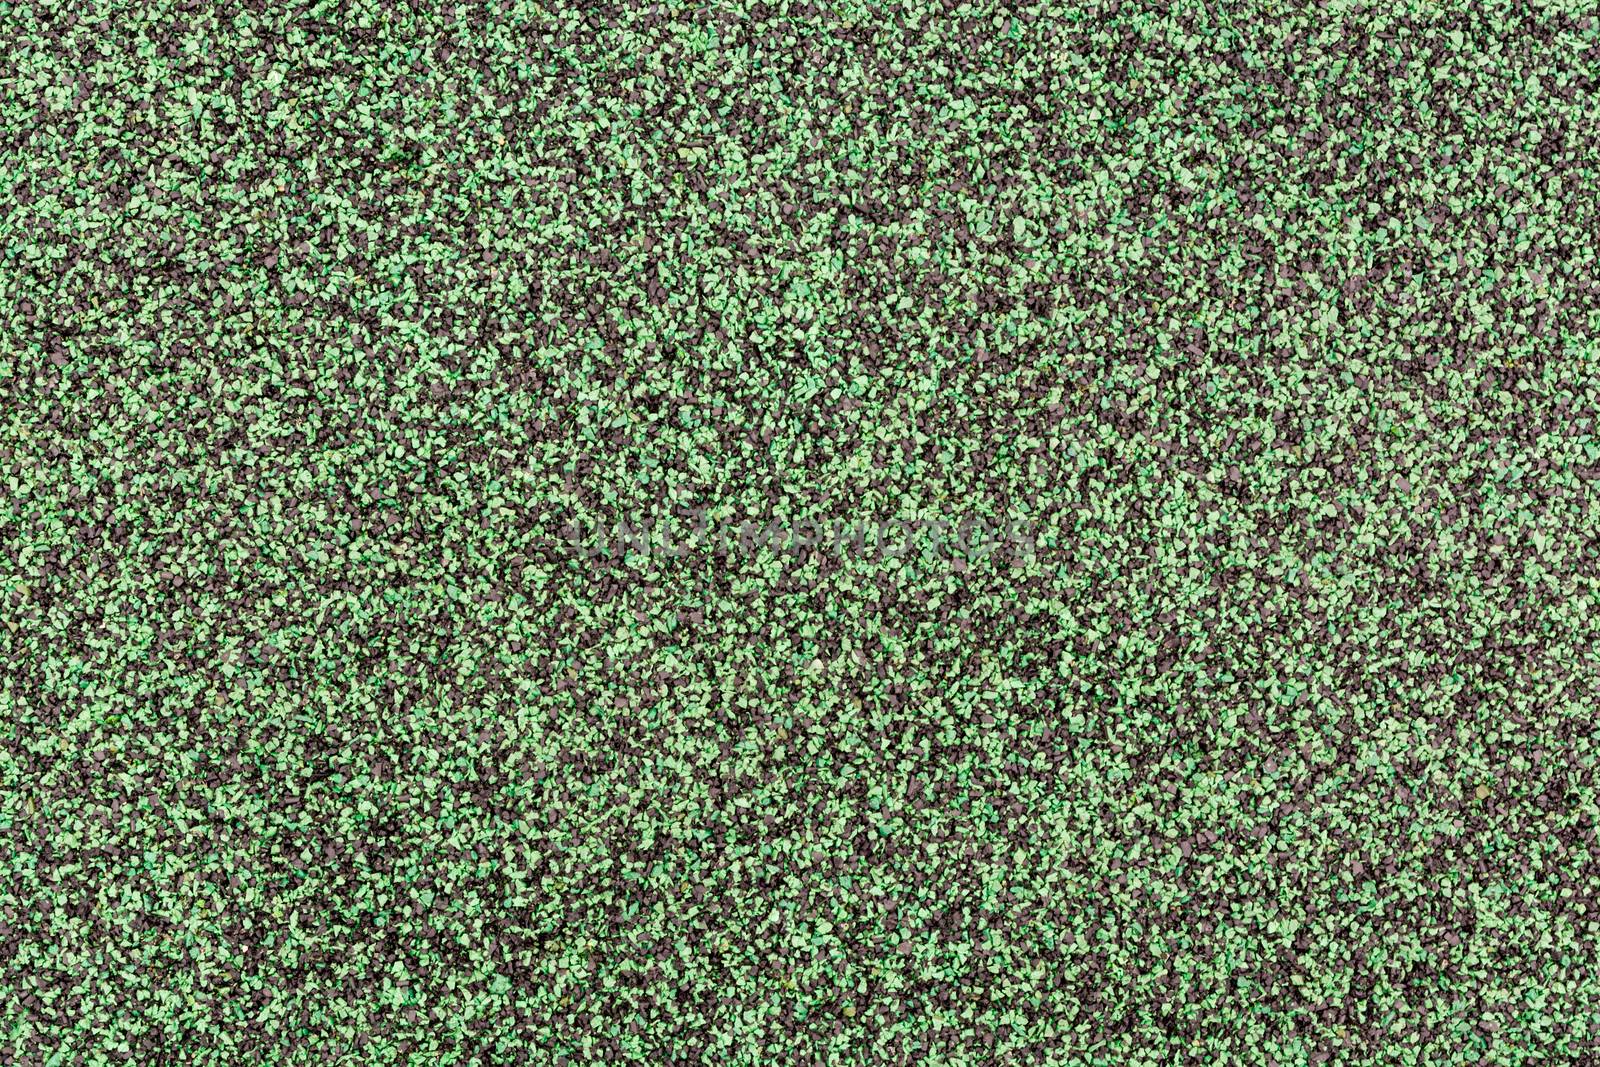 Green and Black Rubber Floor or Mat on playground.